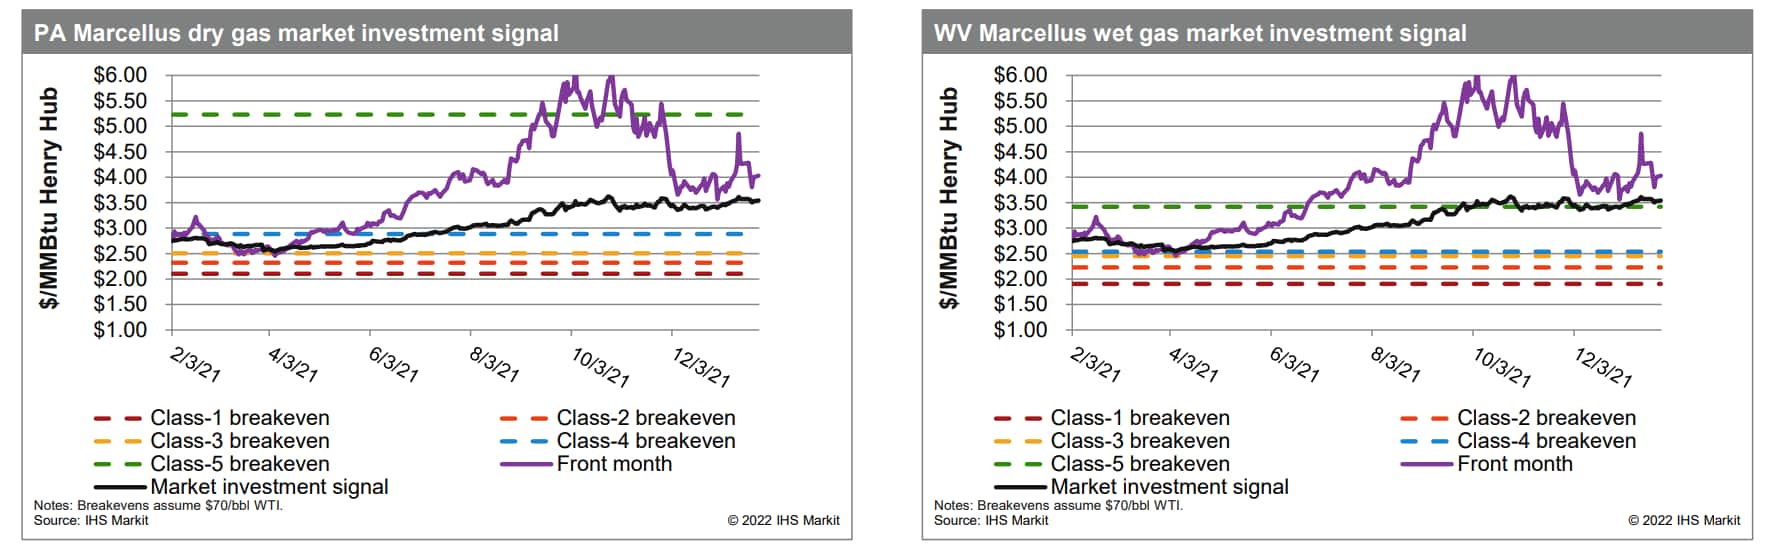 Marcellus gas market investment signal 